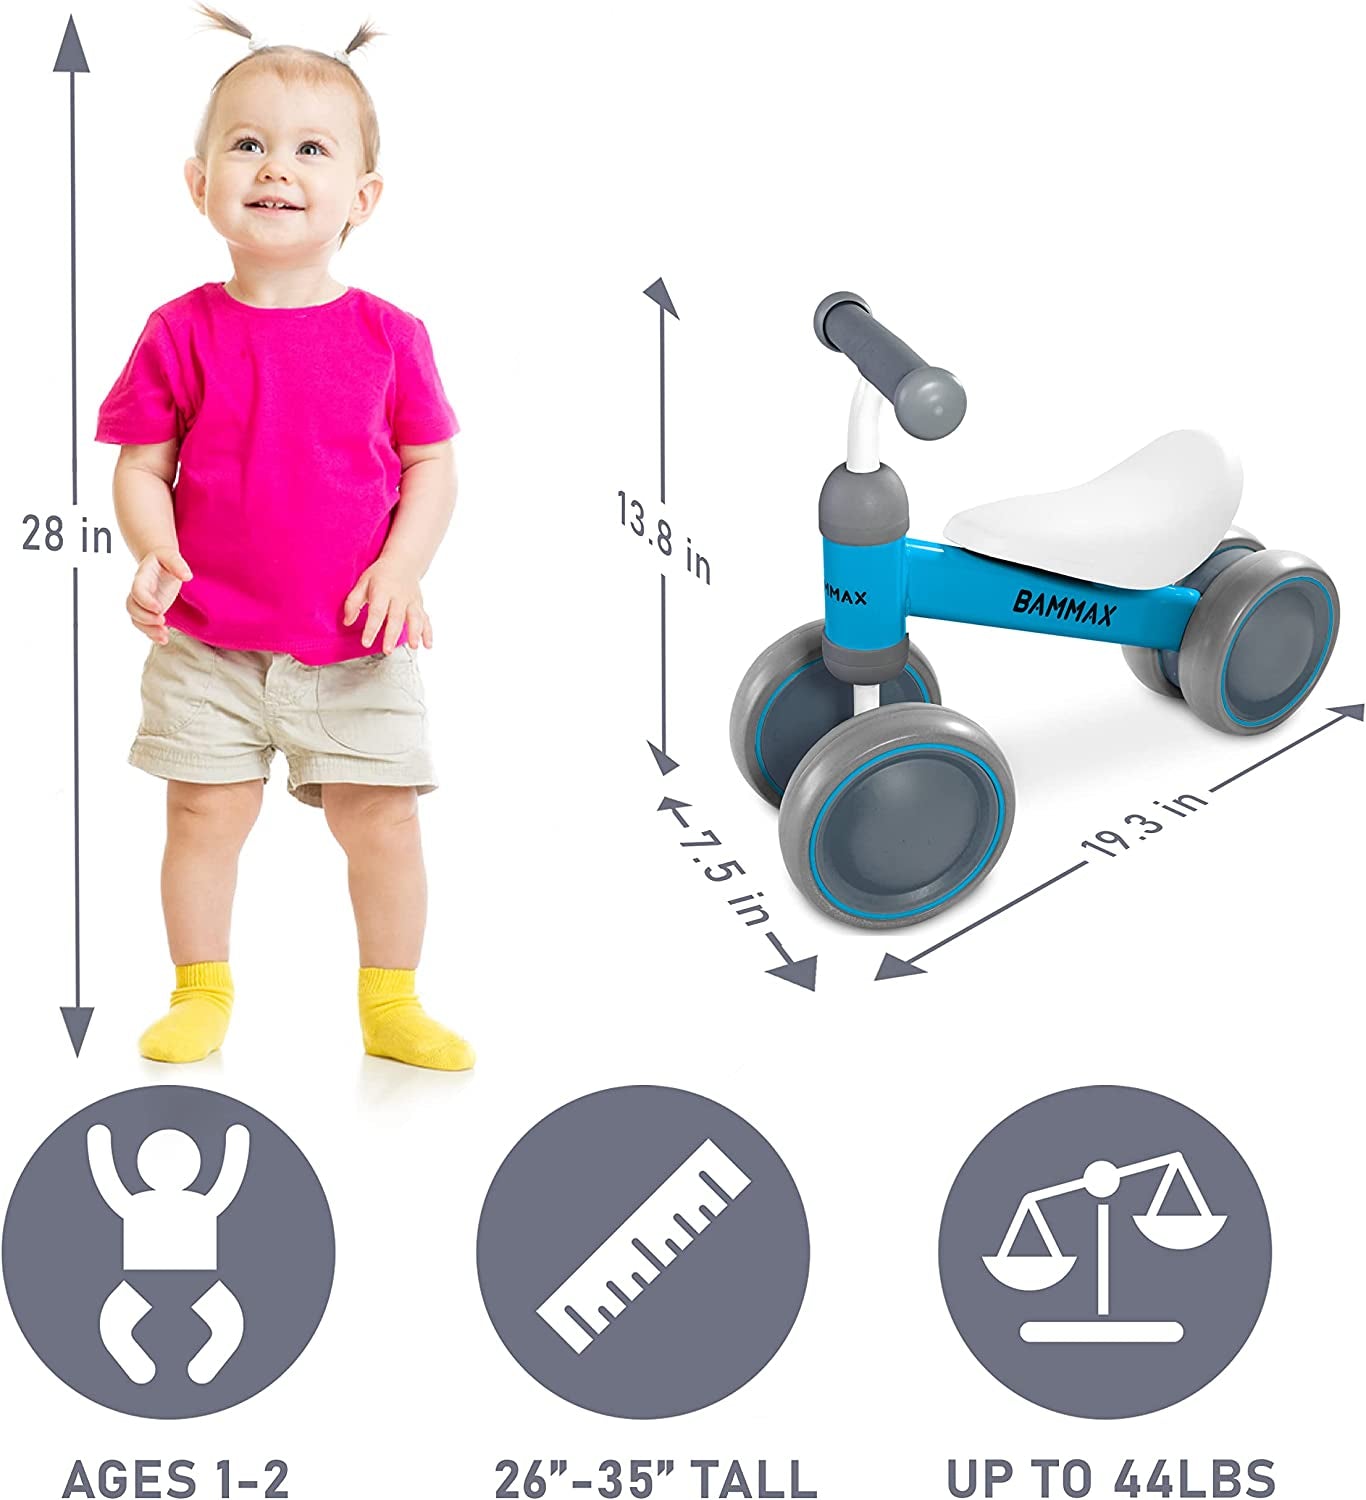 Official Tykebike® Toddler & Baby Bike | Toddler & Baby Balance Bike Ride on Toy | Easy Glide Wheels & Safer Toddler Bike Steering | Indoor/Outdoor Baby & Toddler Ride on Toy for 1+ Year Old